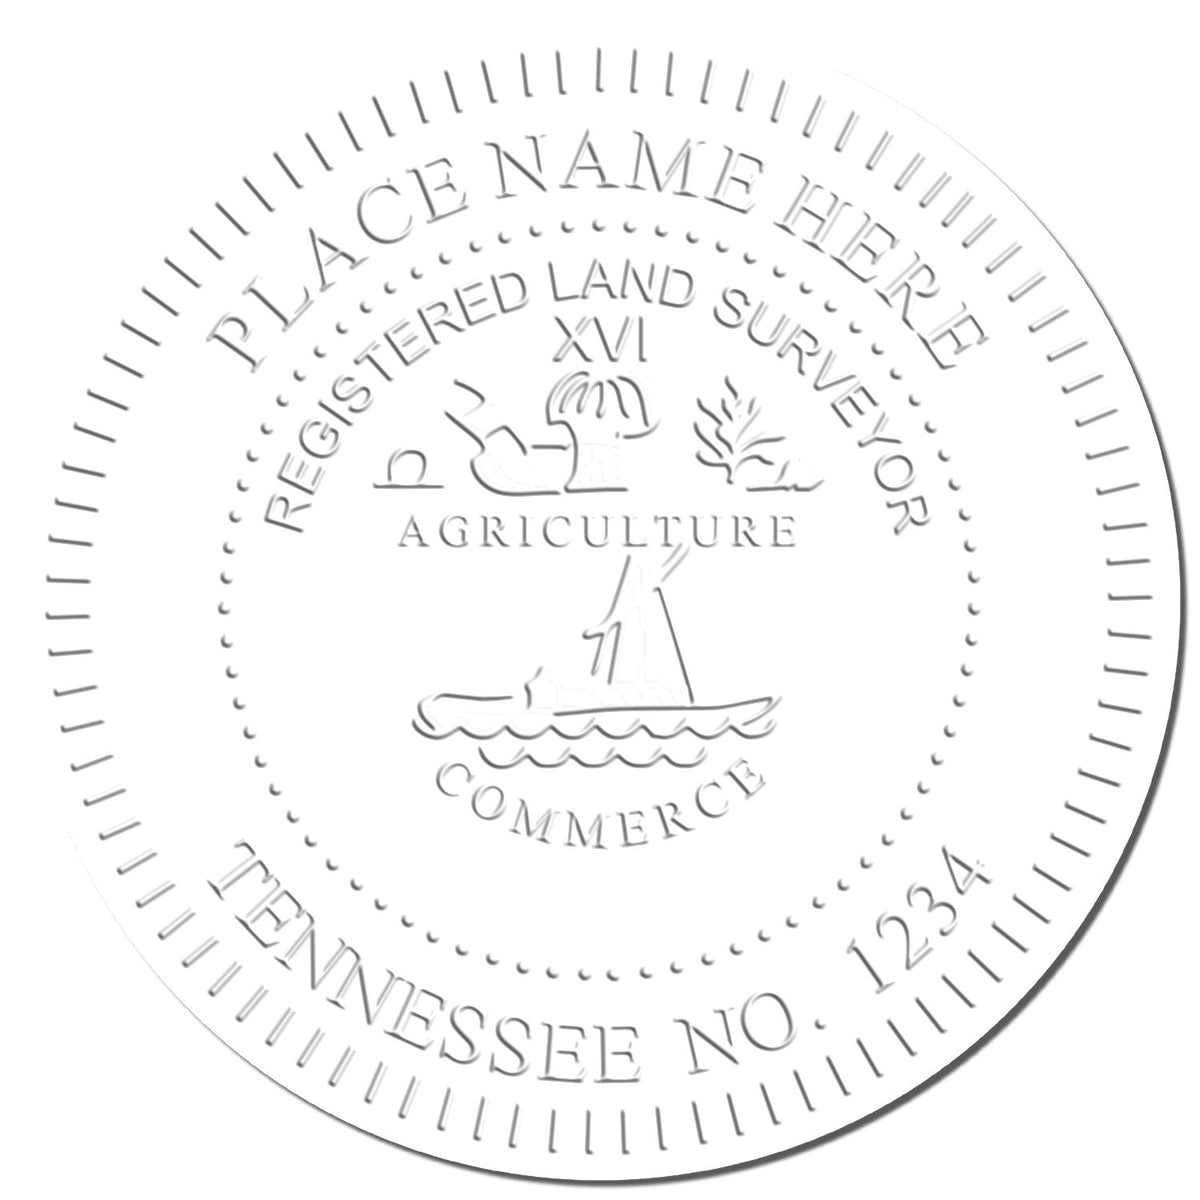 This paper is stamped with a sample imprint of the Gift Tennessee Land Surveyor Seal, signifying its quality and reliability.